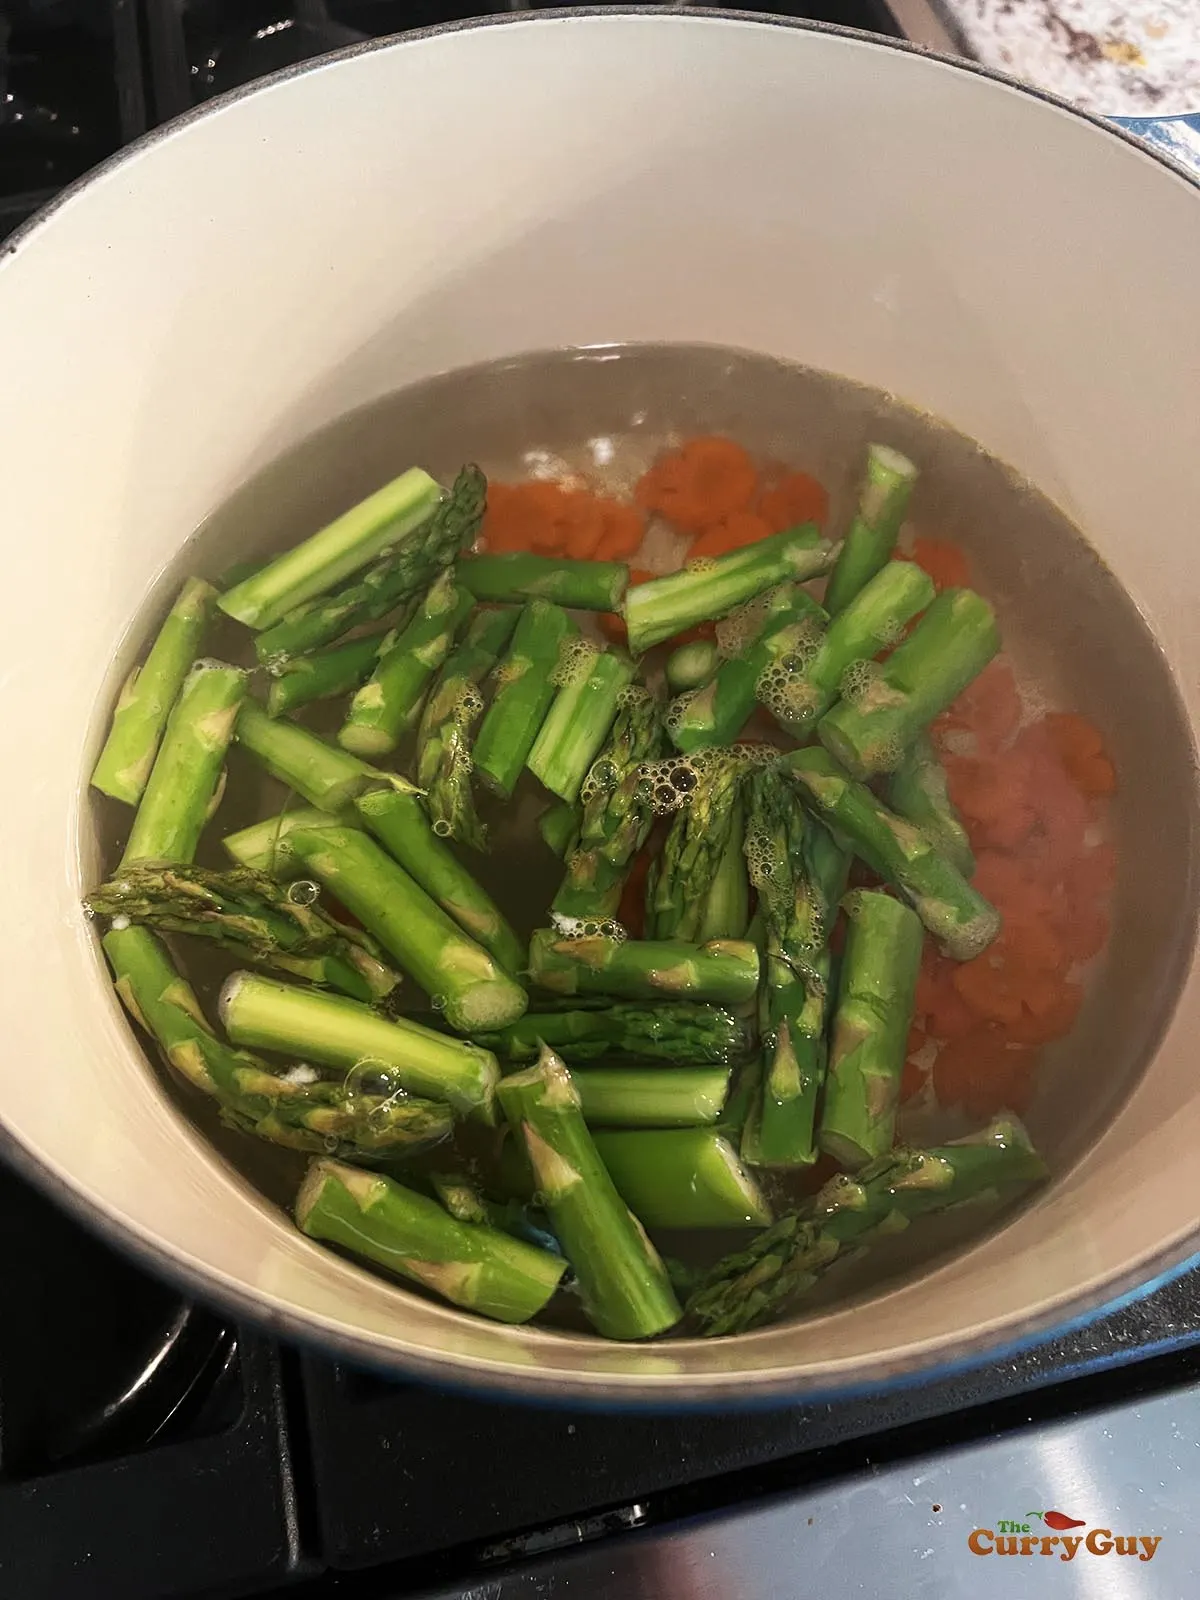 Blanching the carrots and asparagus.